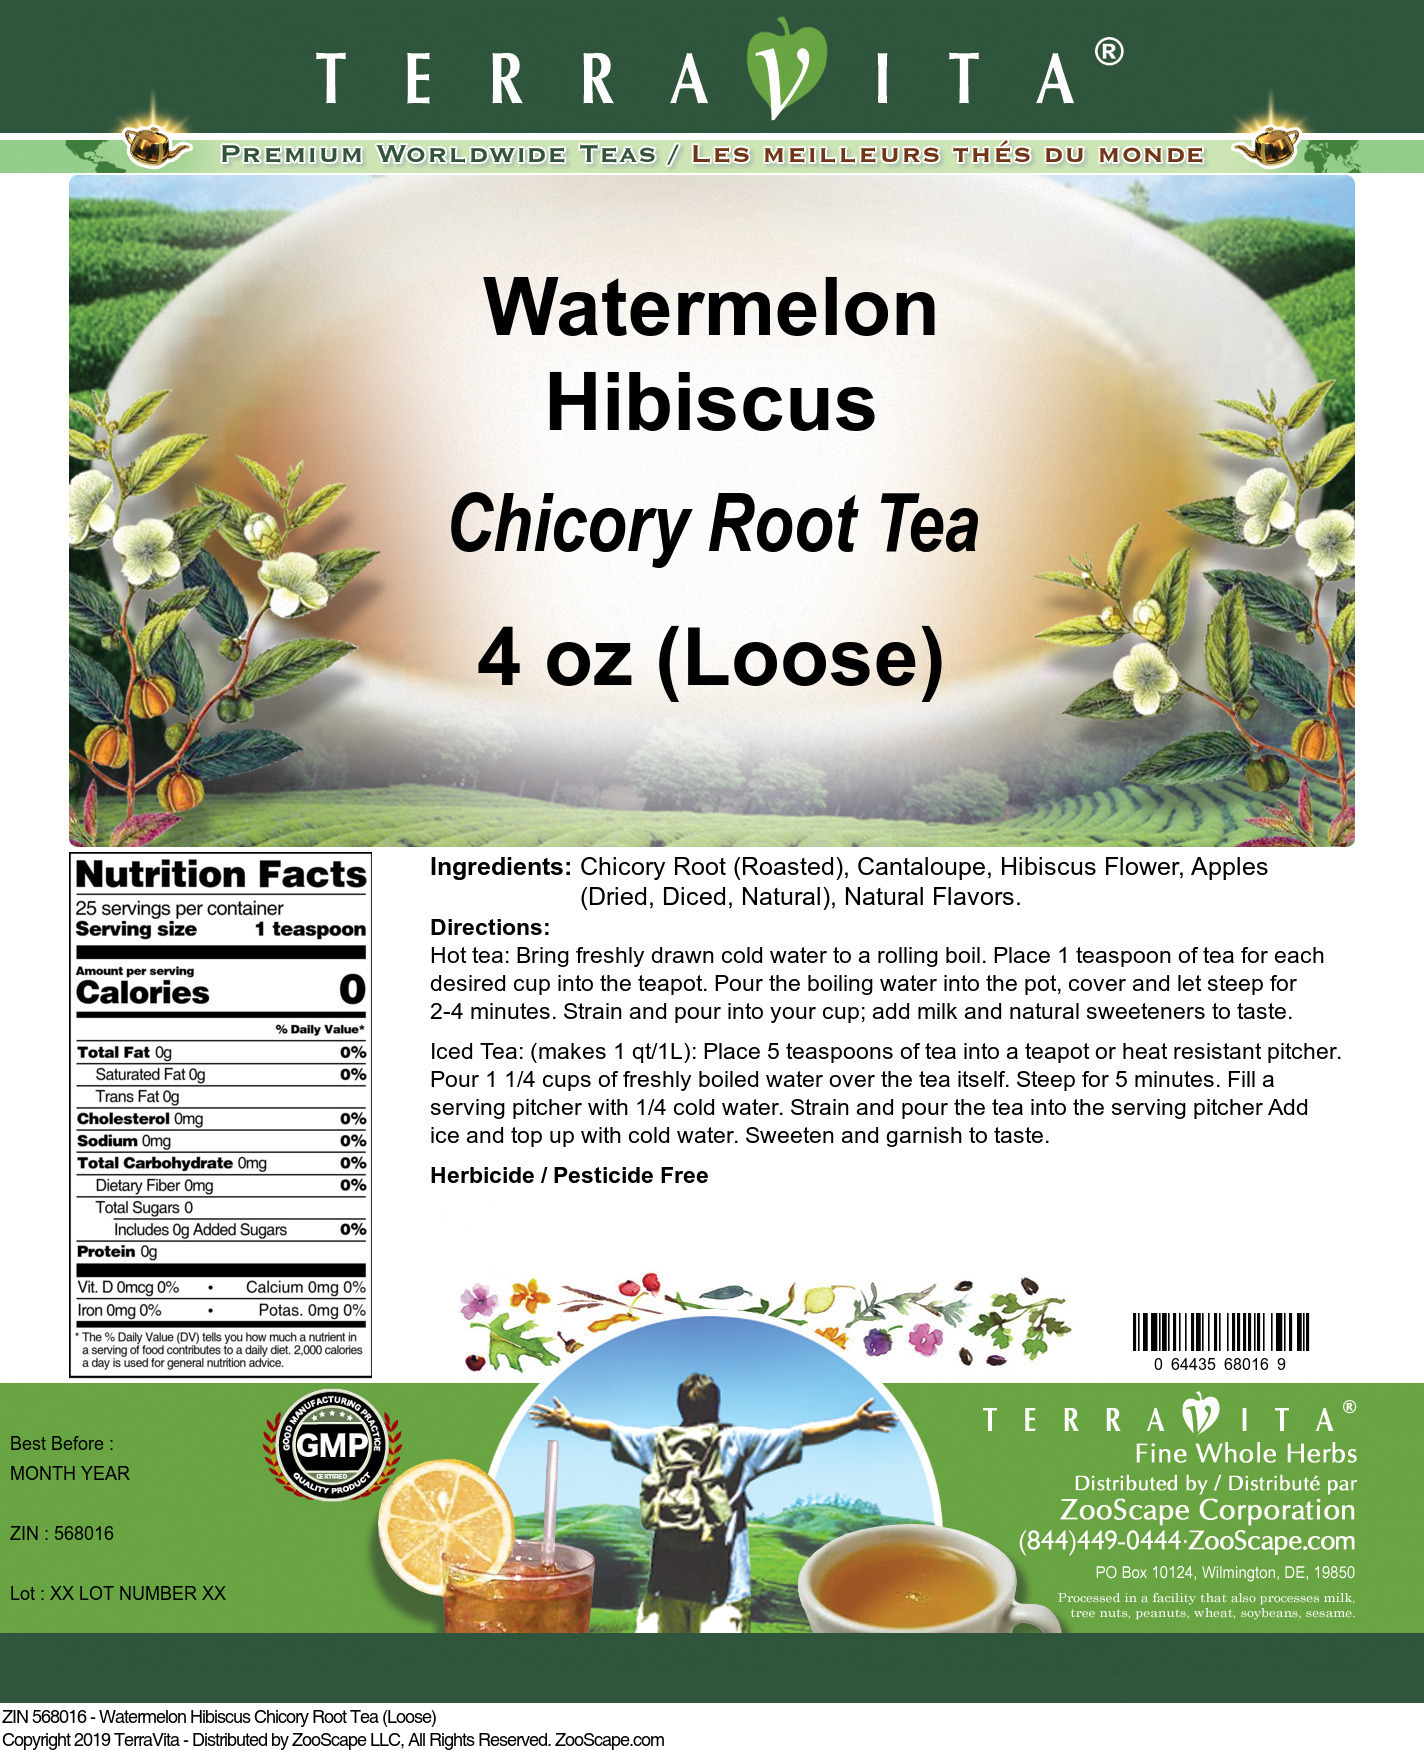 Watermelon Hibiscus Chicory Root Tea (Loose) - Label